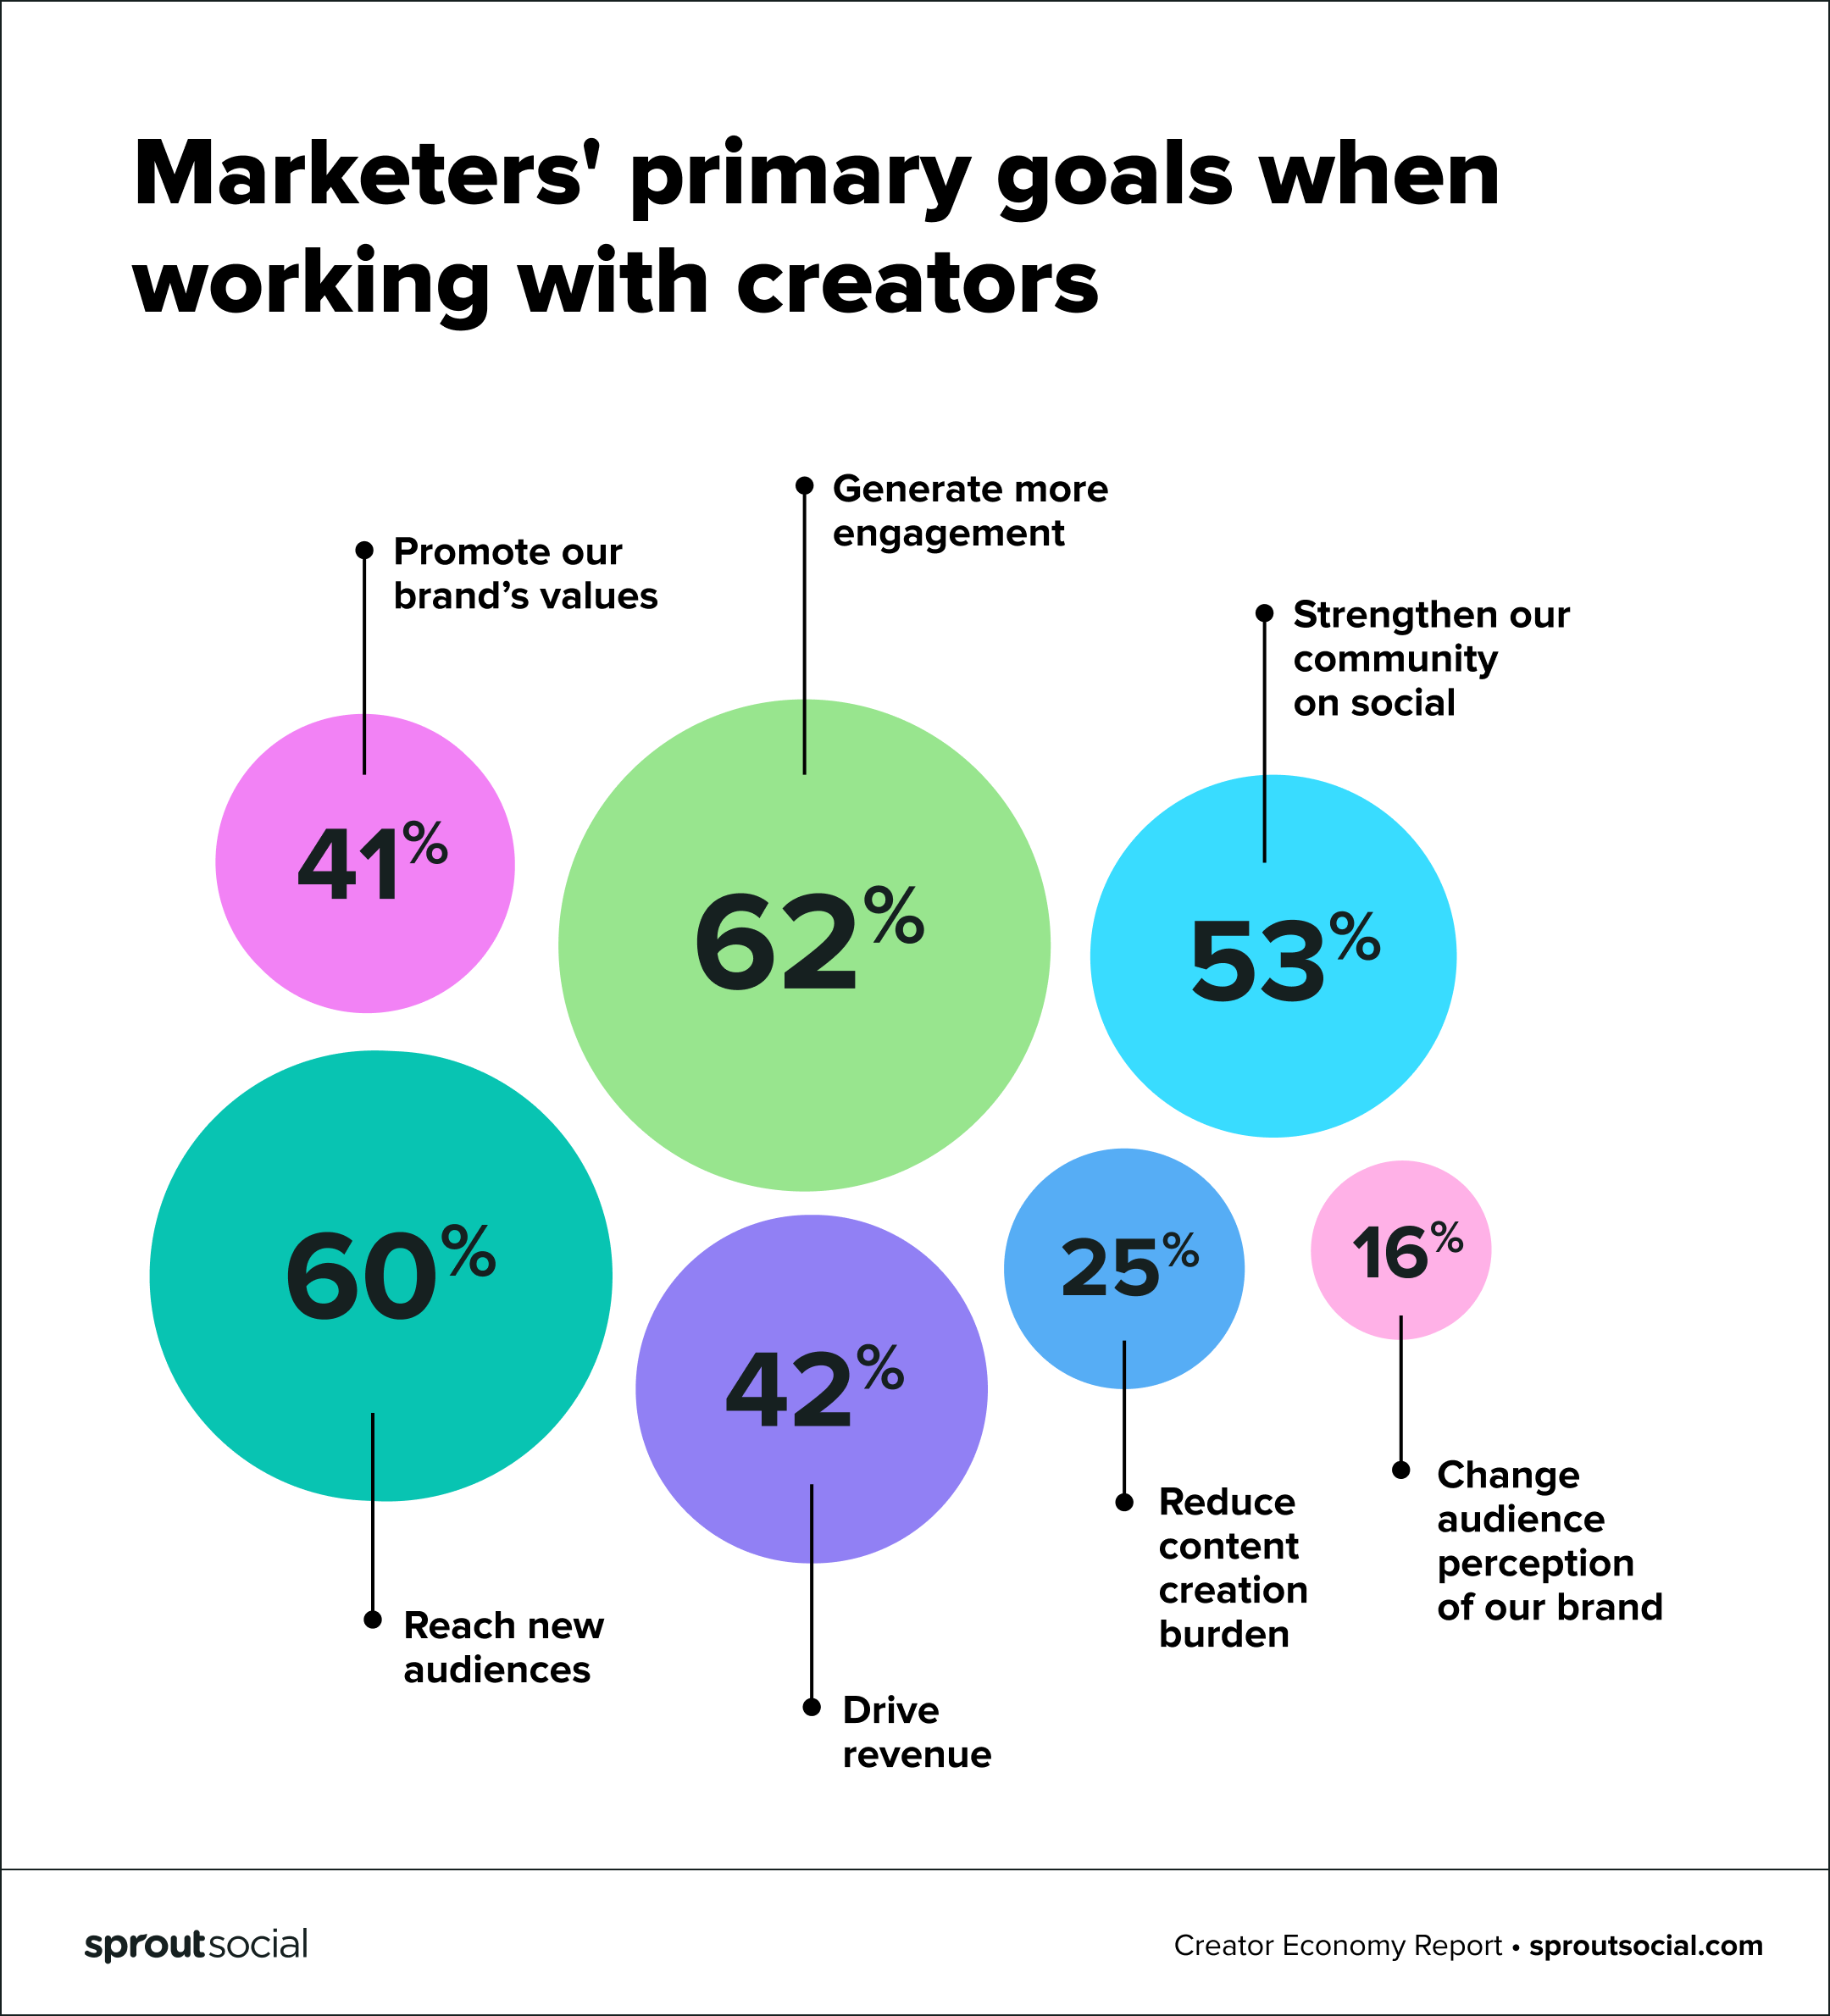 Marketers' primary goals when working with creators